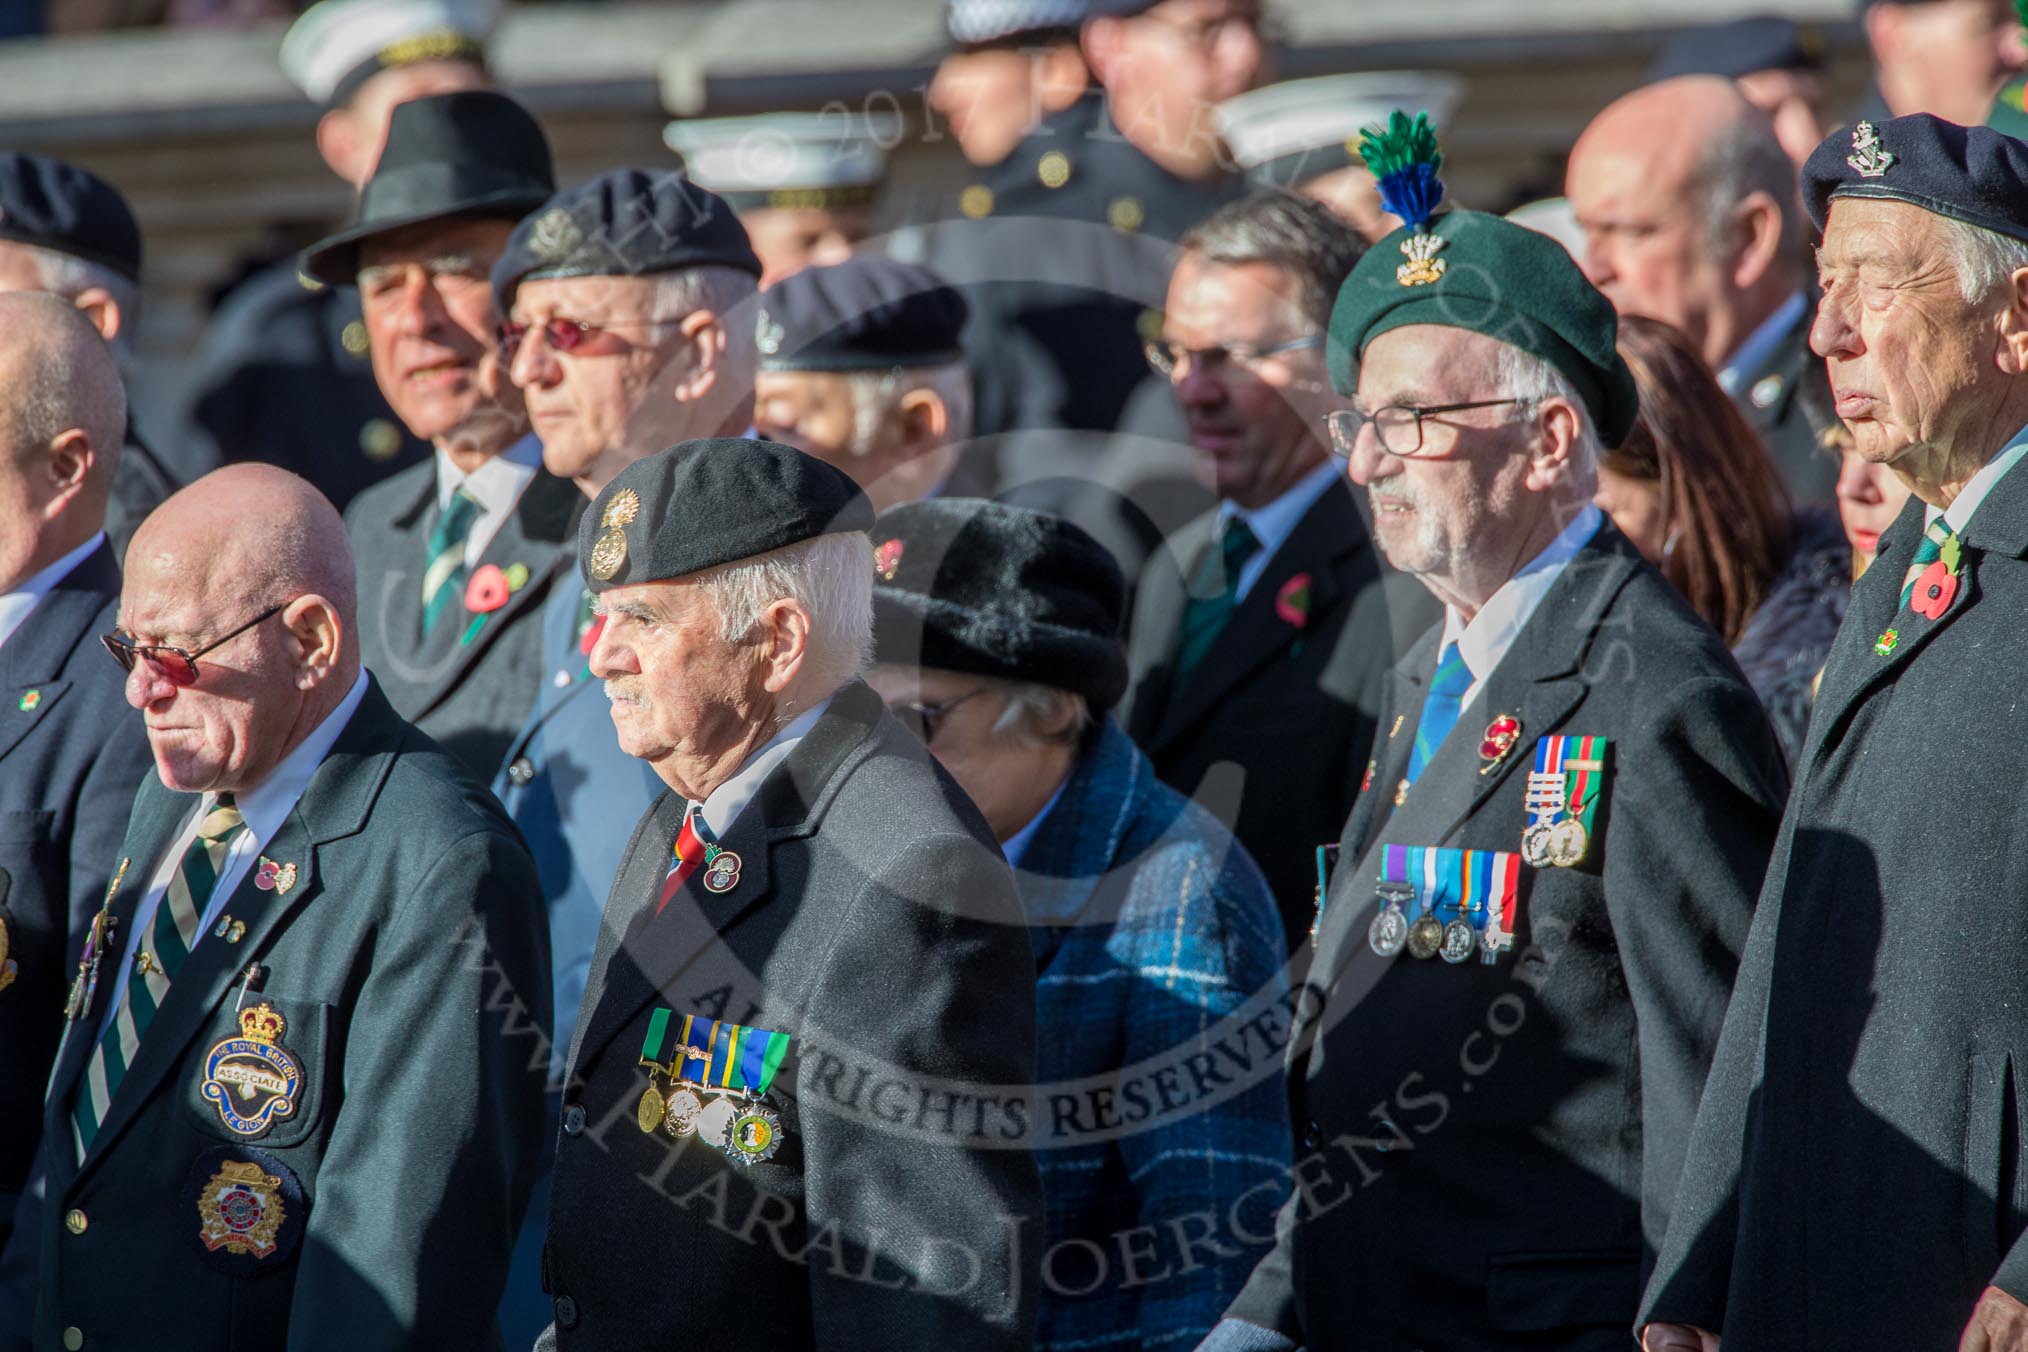 Combined Irish Regiments Association (Group A36, 34 members) during the Royal British Legion March Past on Remembrance Sunday at the Cenotaph, Whitehall, Westminster, London, 11 November 2018, 12:02.